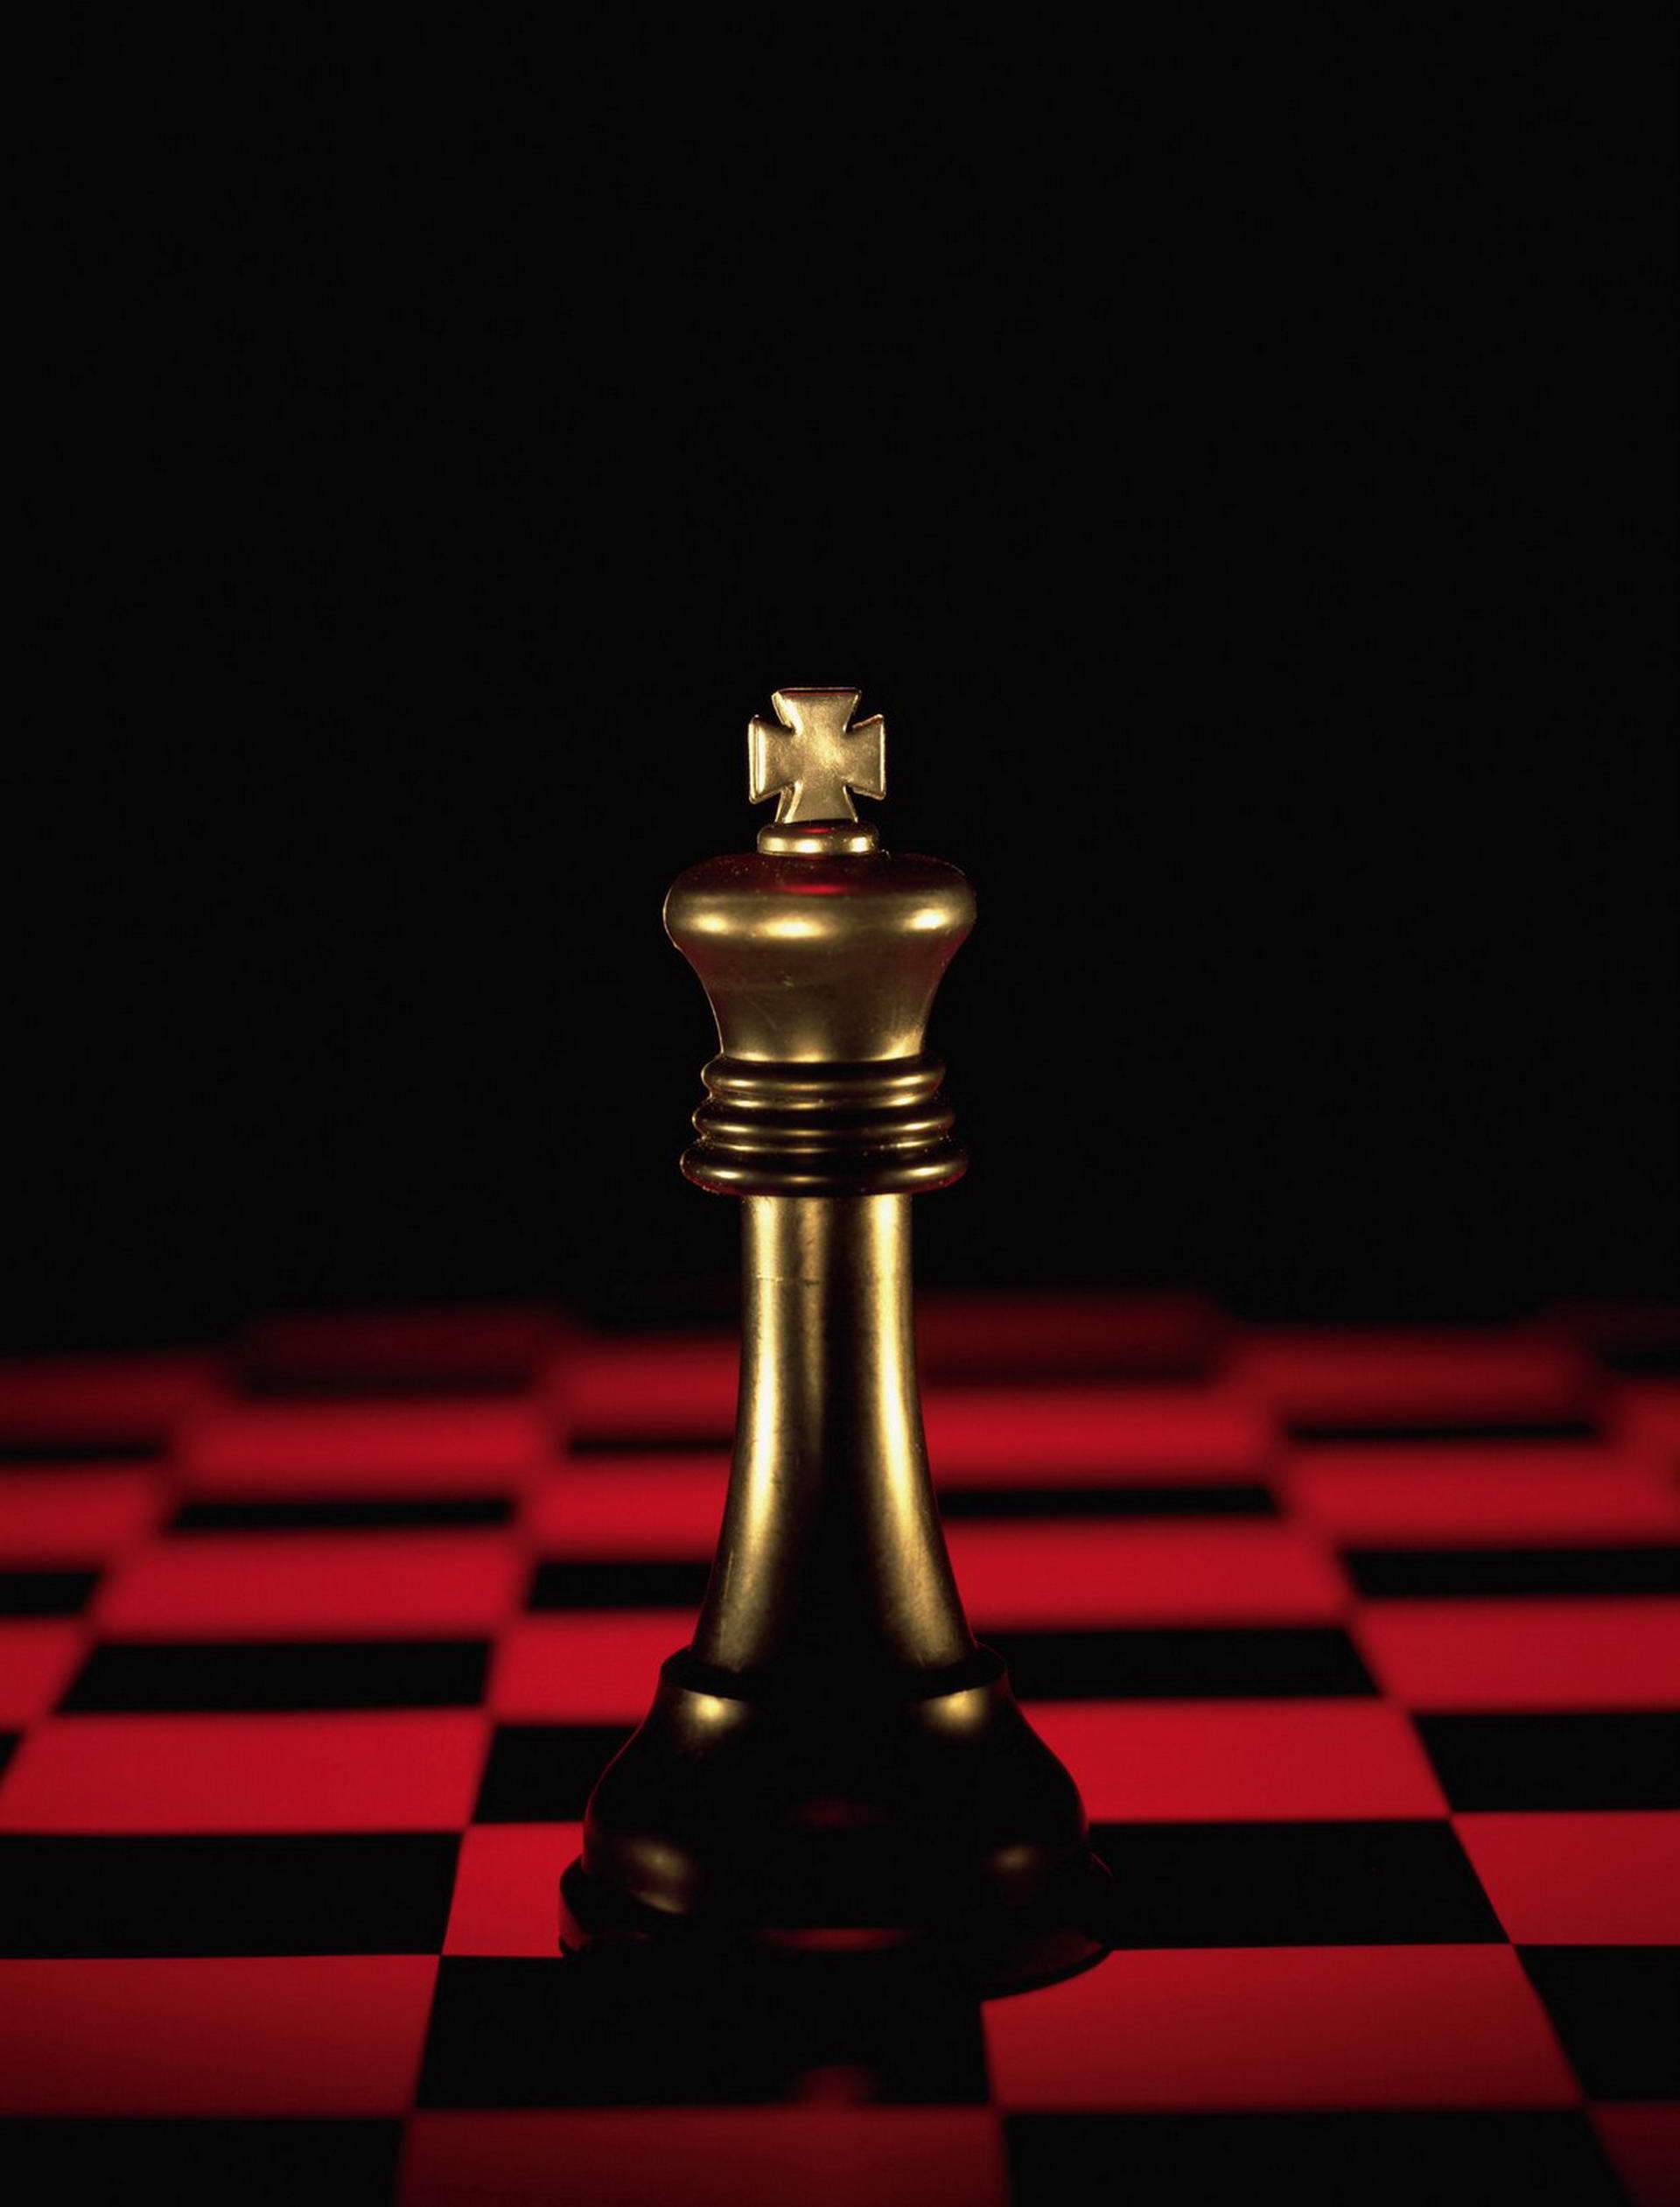 chess, black, objects, background